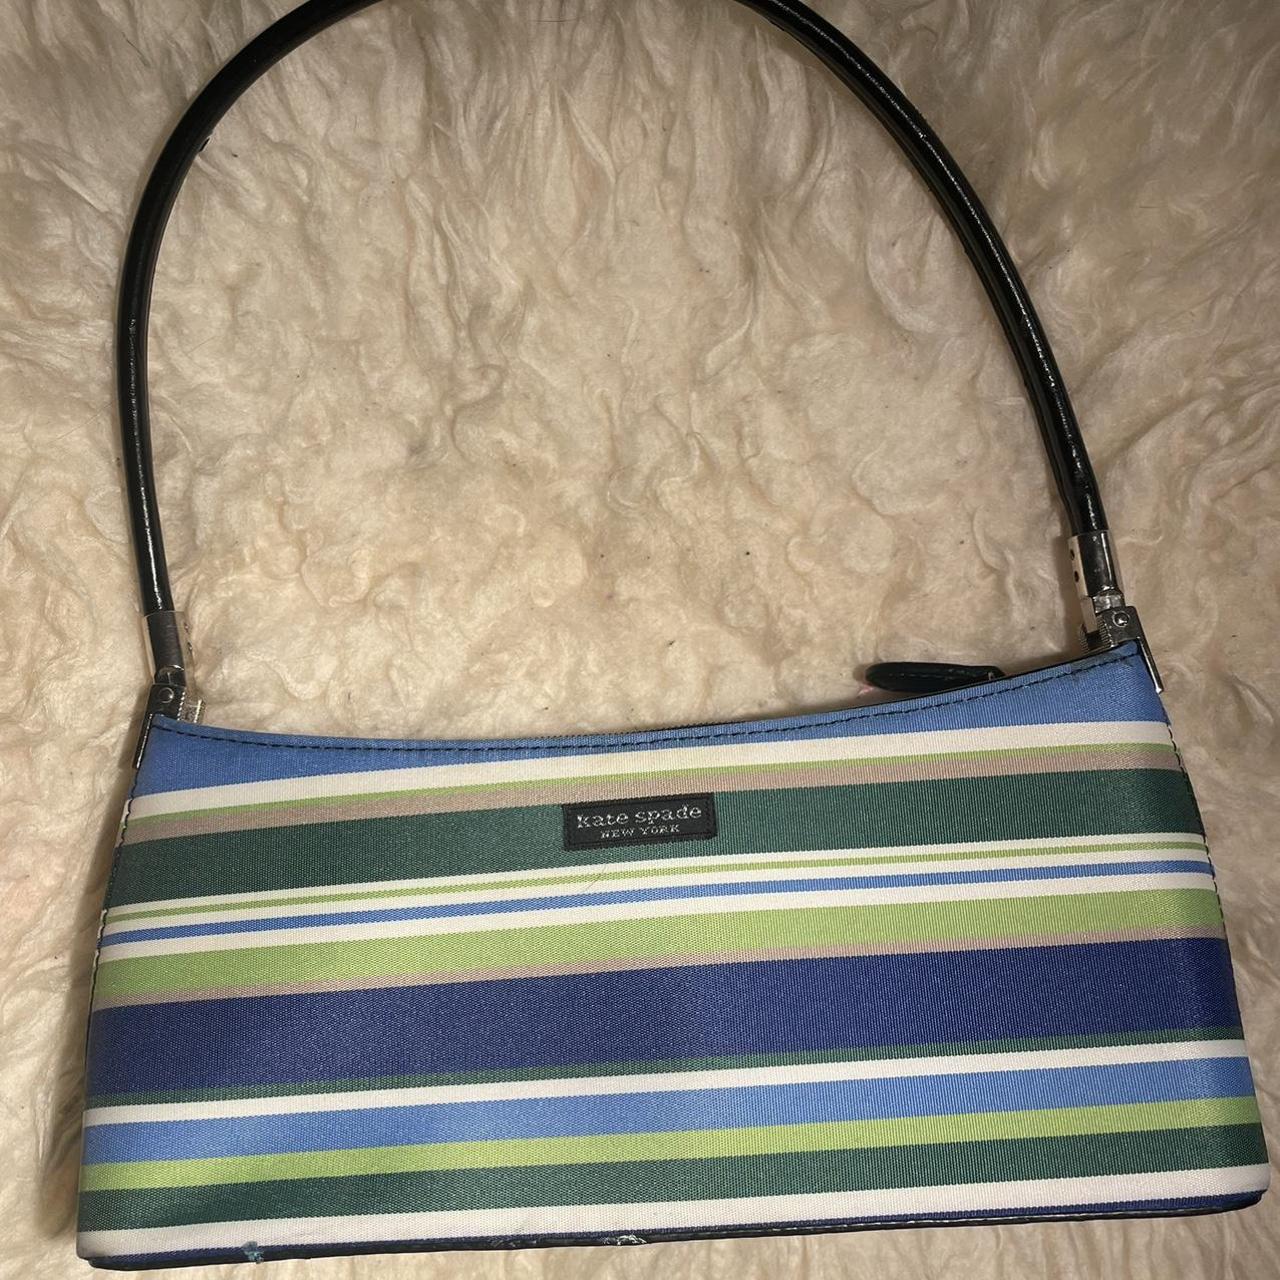 Kate Spade navy blue stripe tote bag - clothing & accessories - by owner -  apparel sale - craigslist